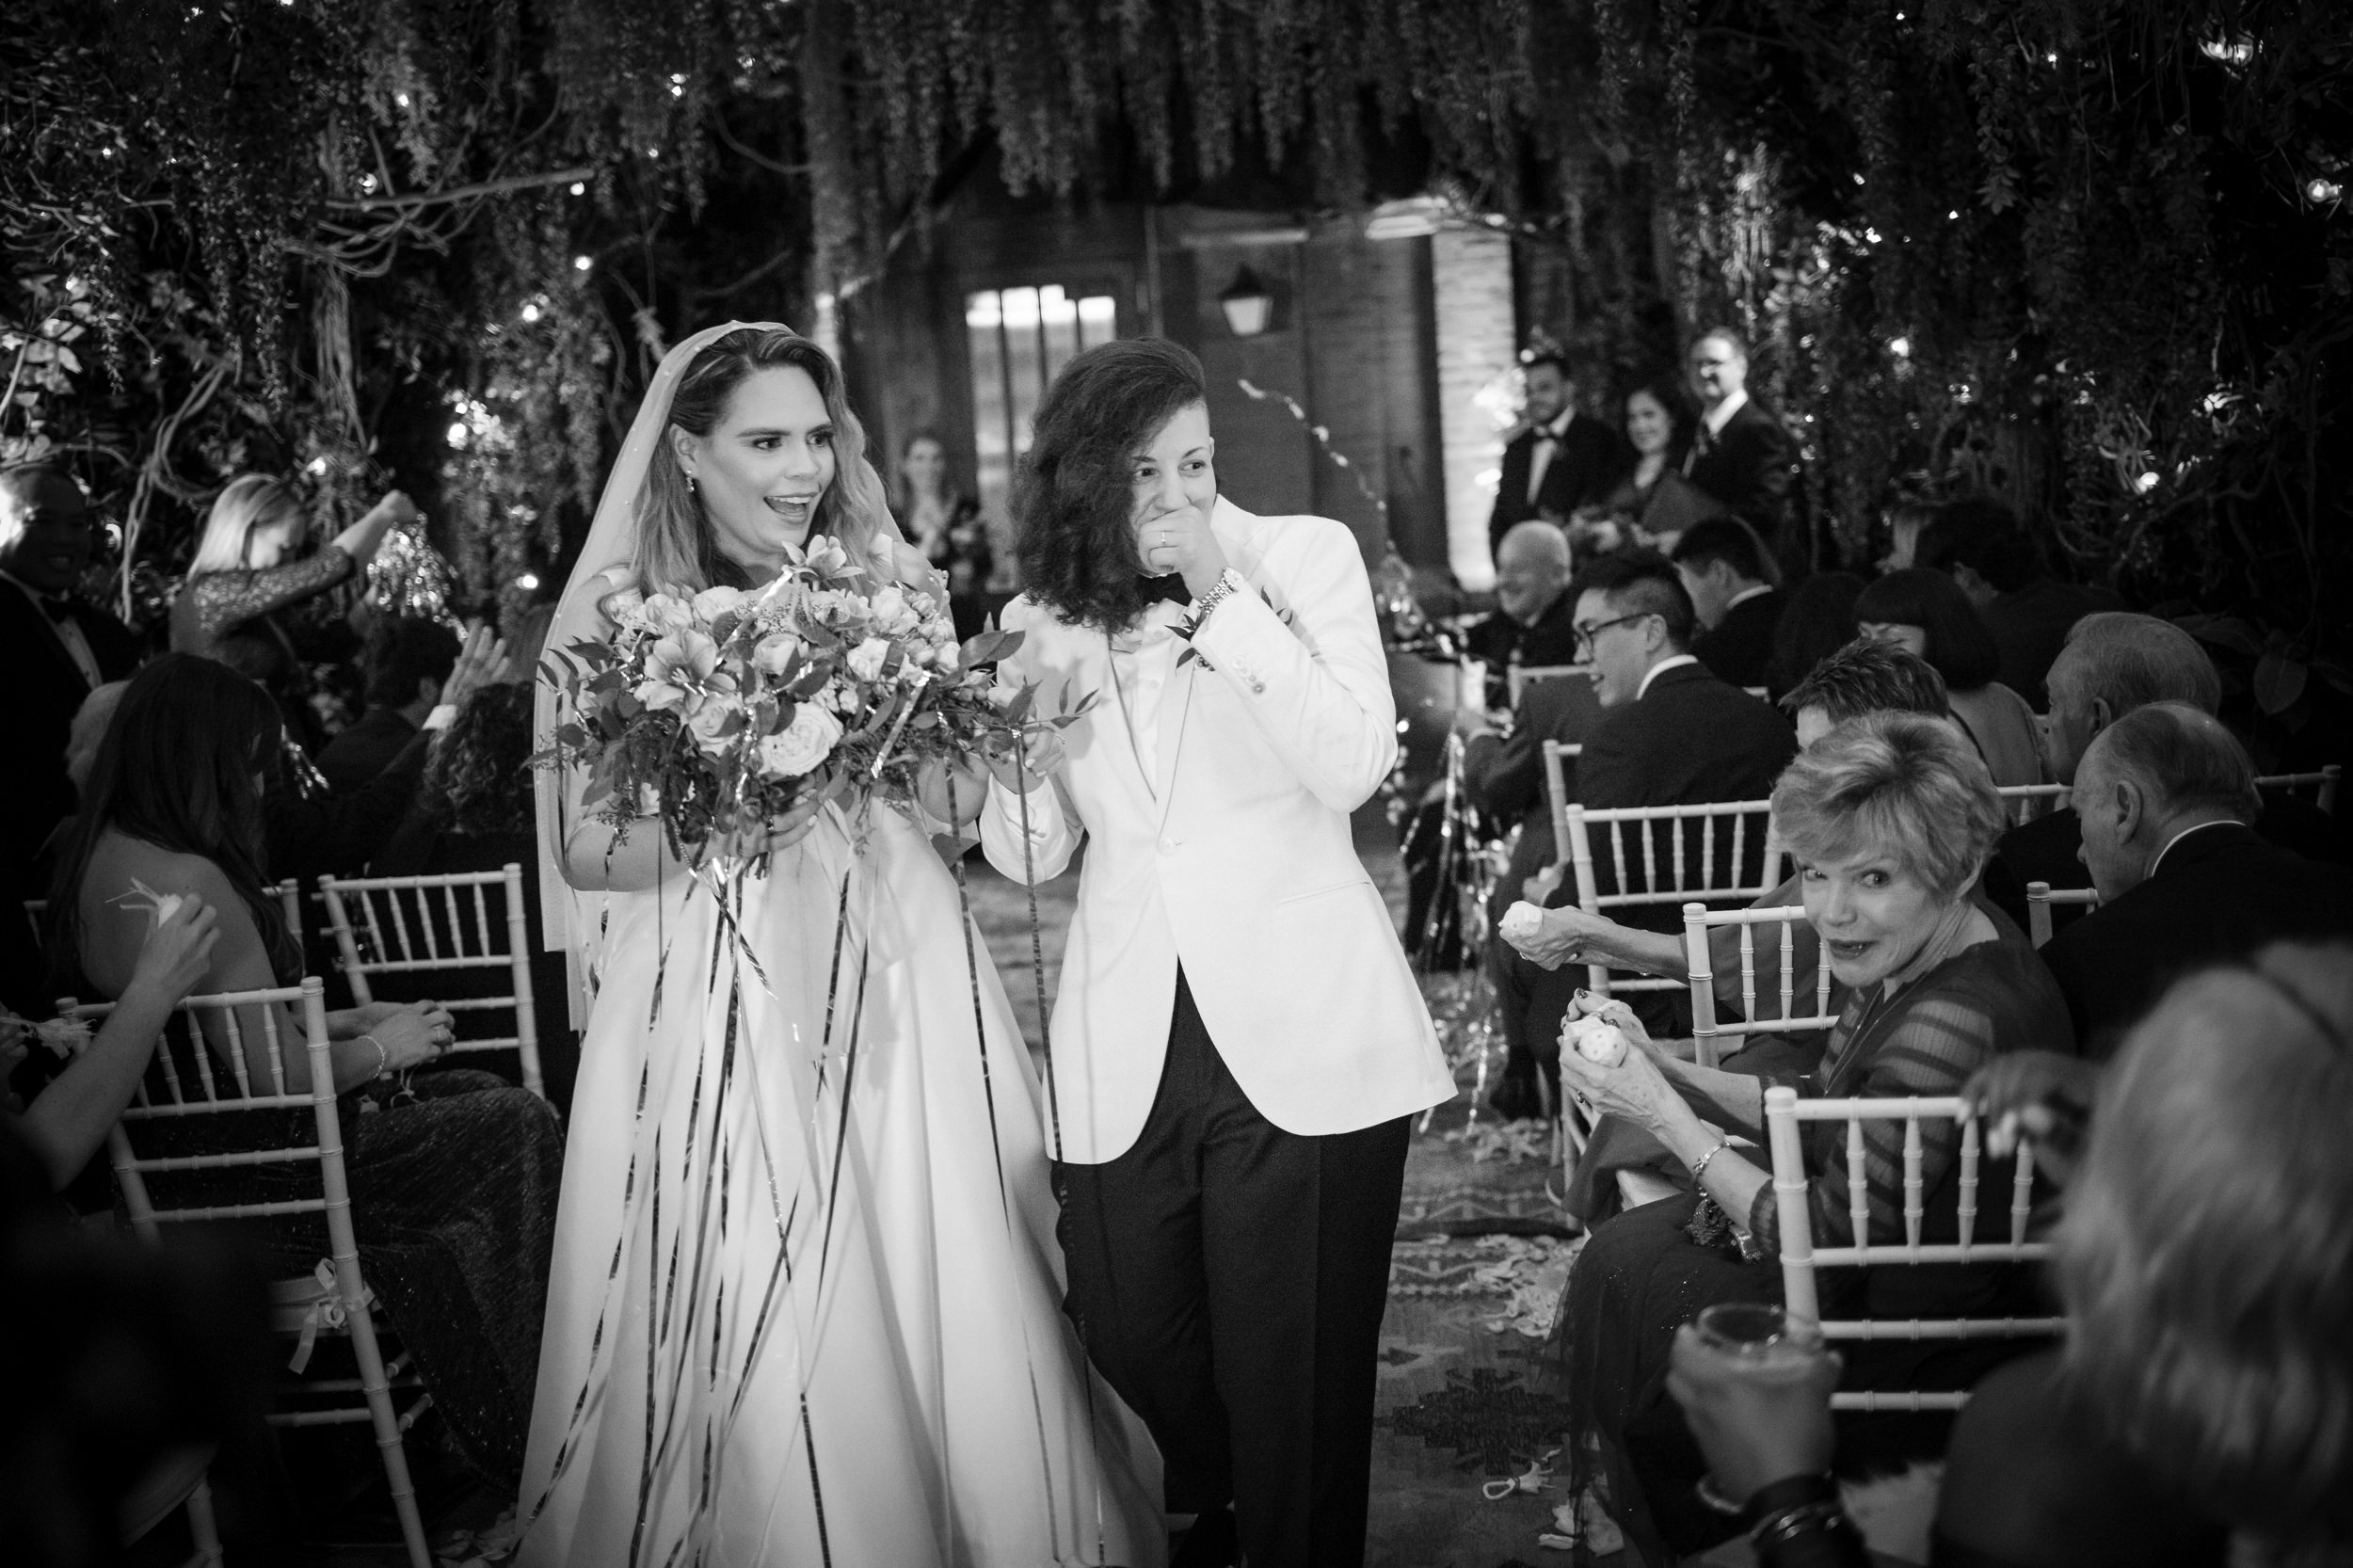 Two brides with streamers during their ceremony at a Beekman Hotel wedding in NYC